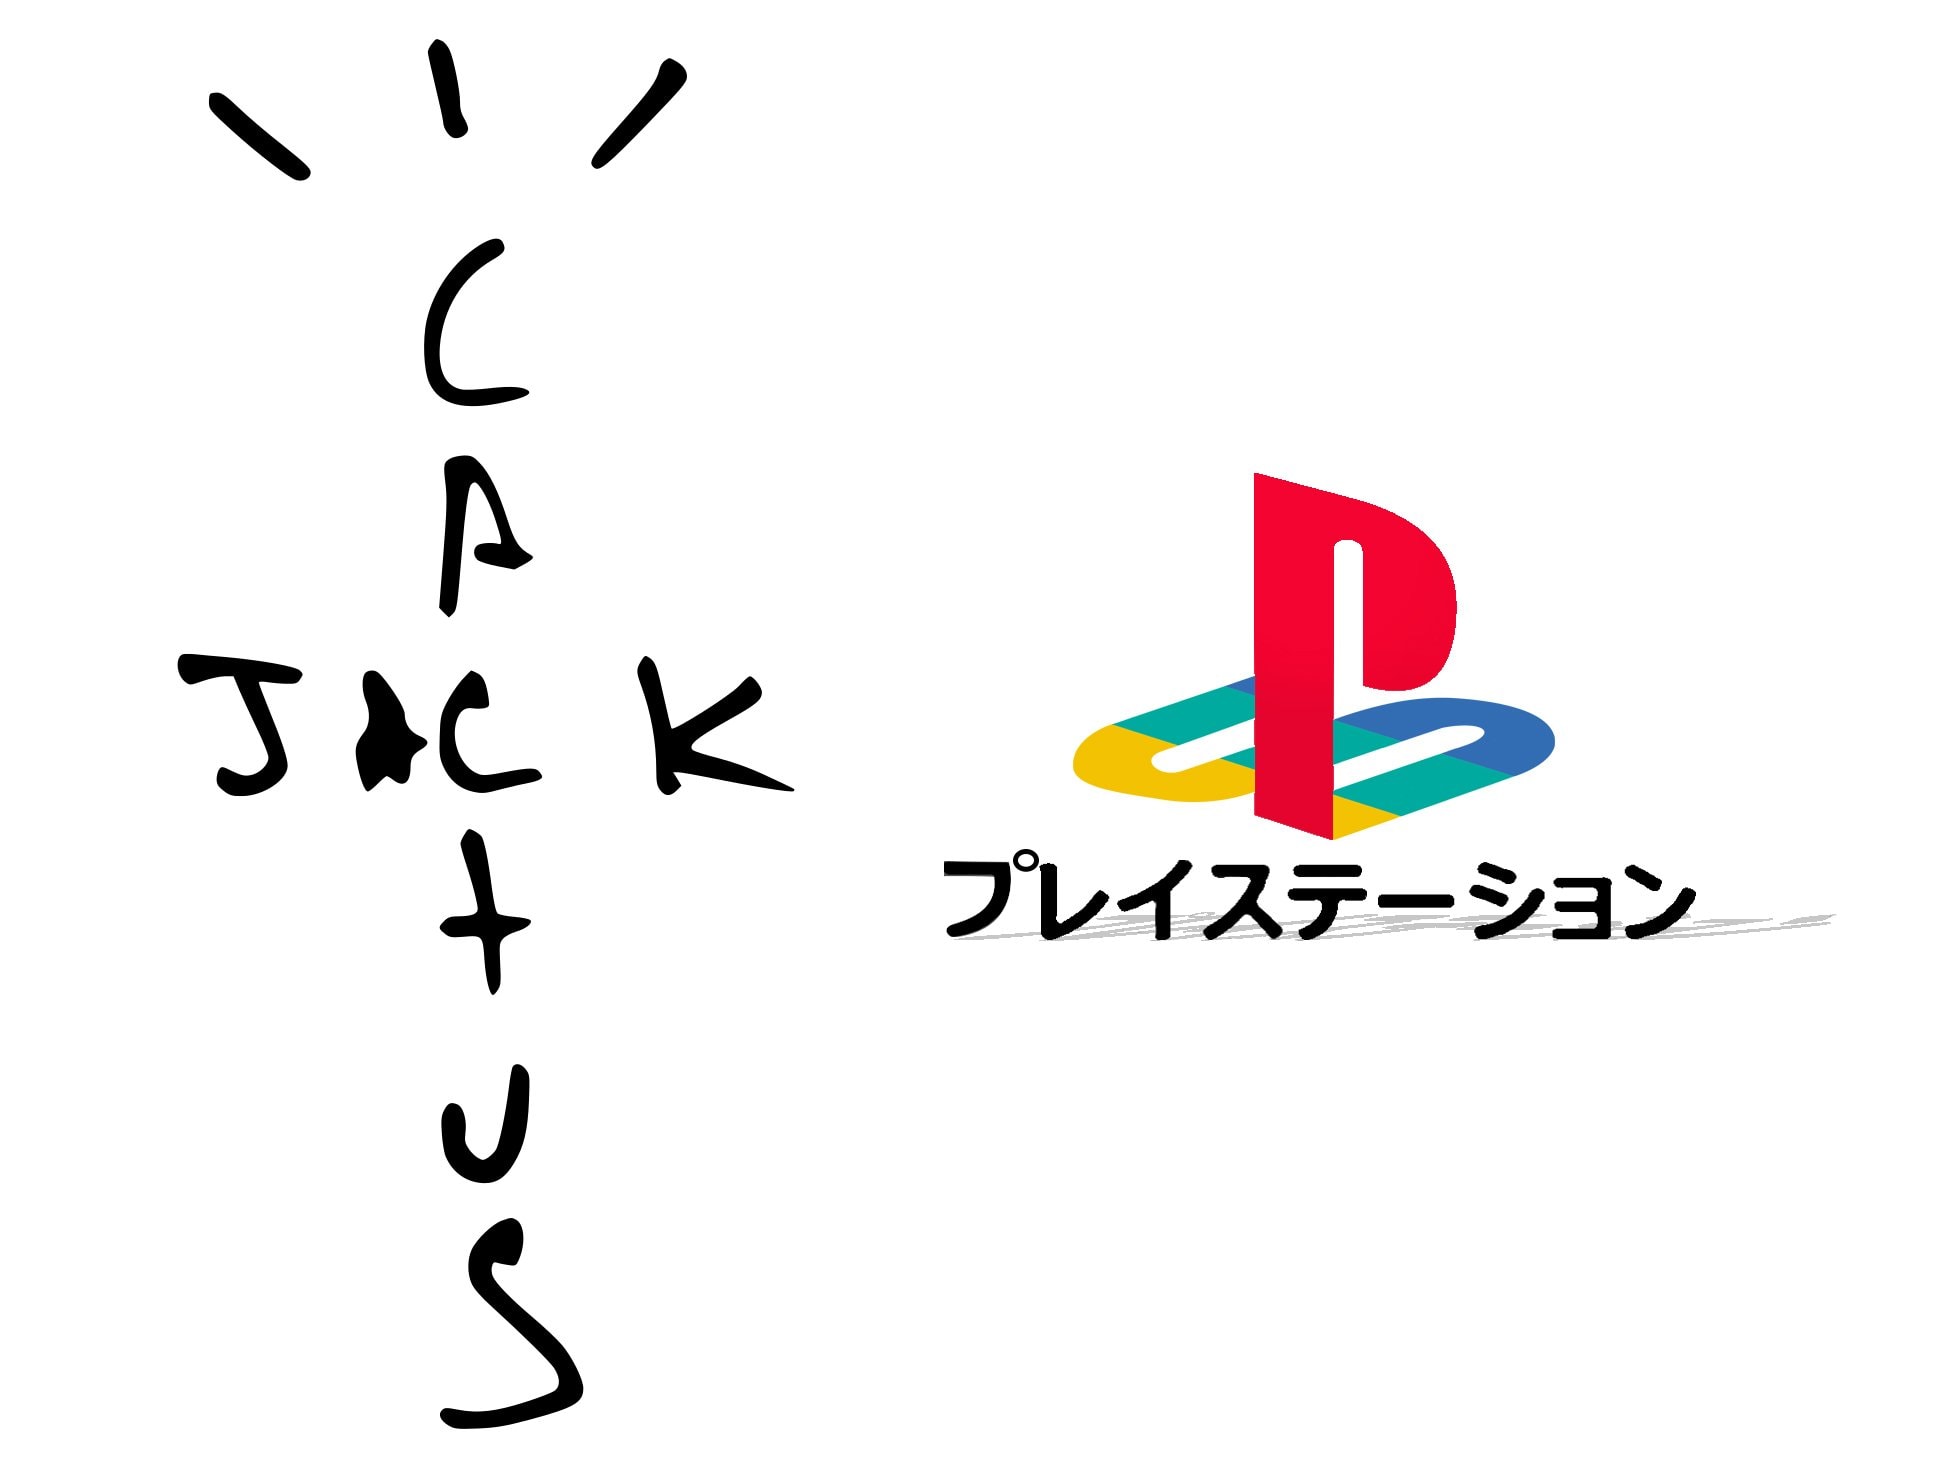 Travis Scott's Cactus Jack record label and video game brand PlayStation have collaborated to celebrate the release of the PS5 gaming console in November 2020